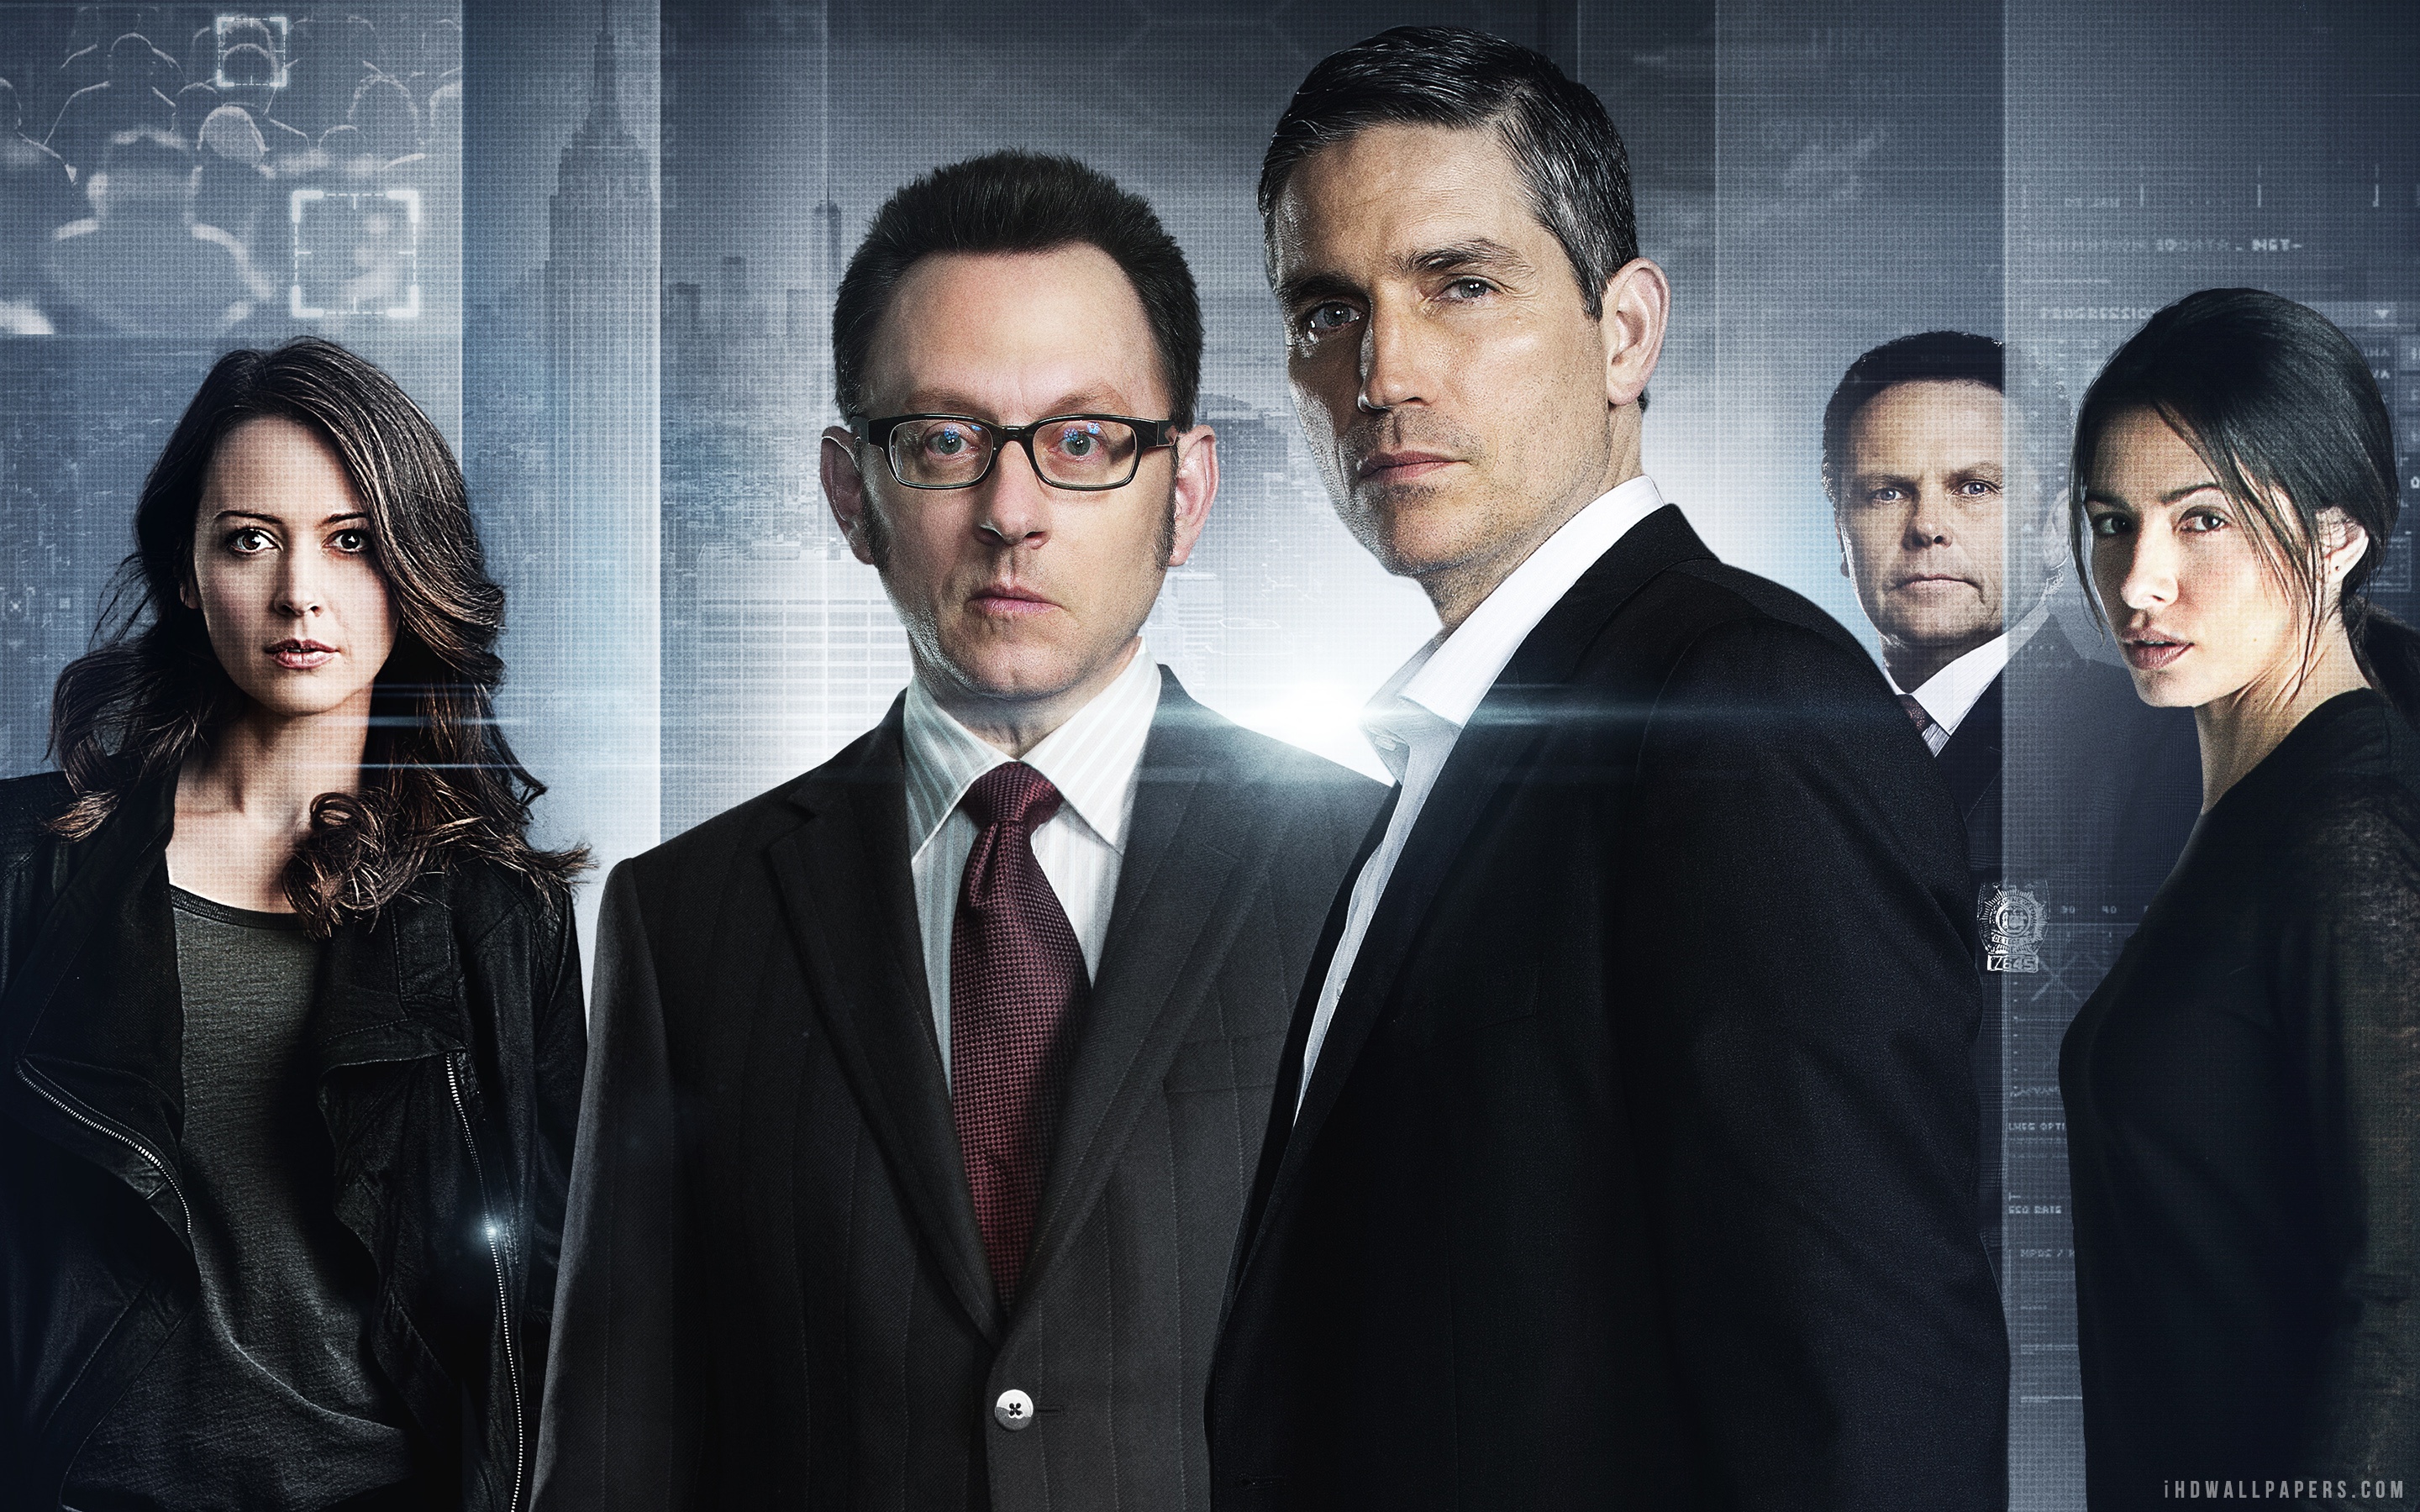 Free download Person of Interest TV Series HD Wallpaper iHD Wallpapers